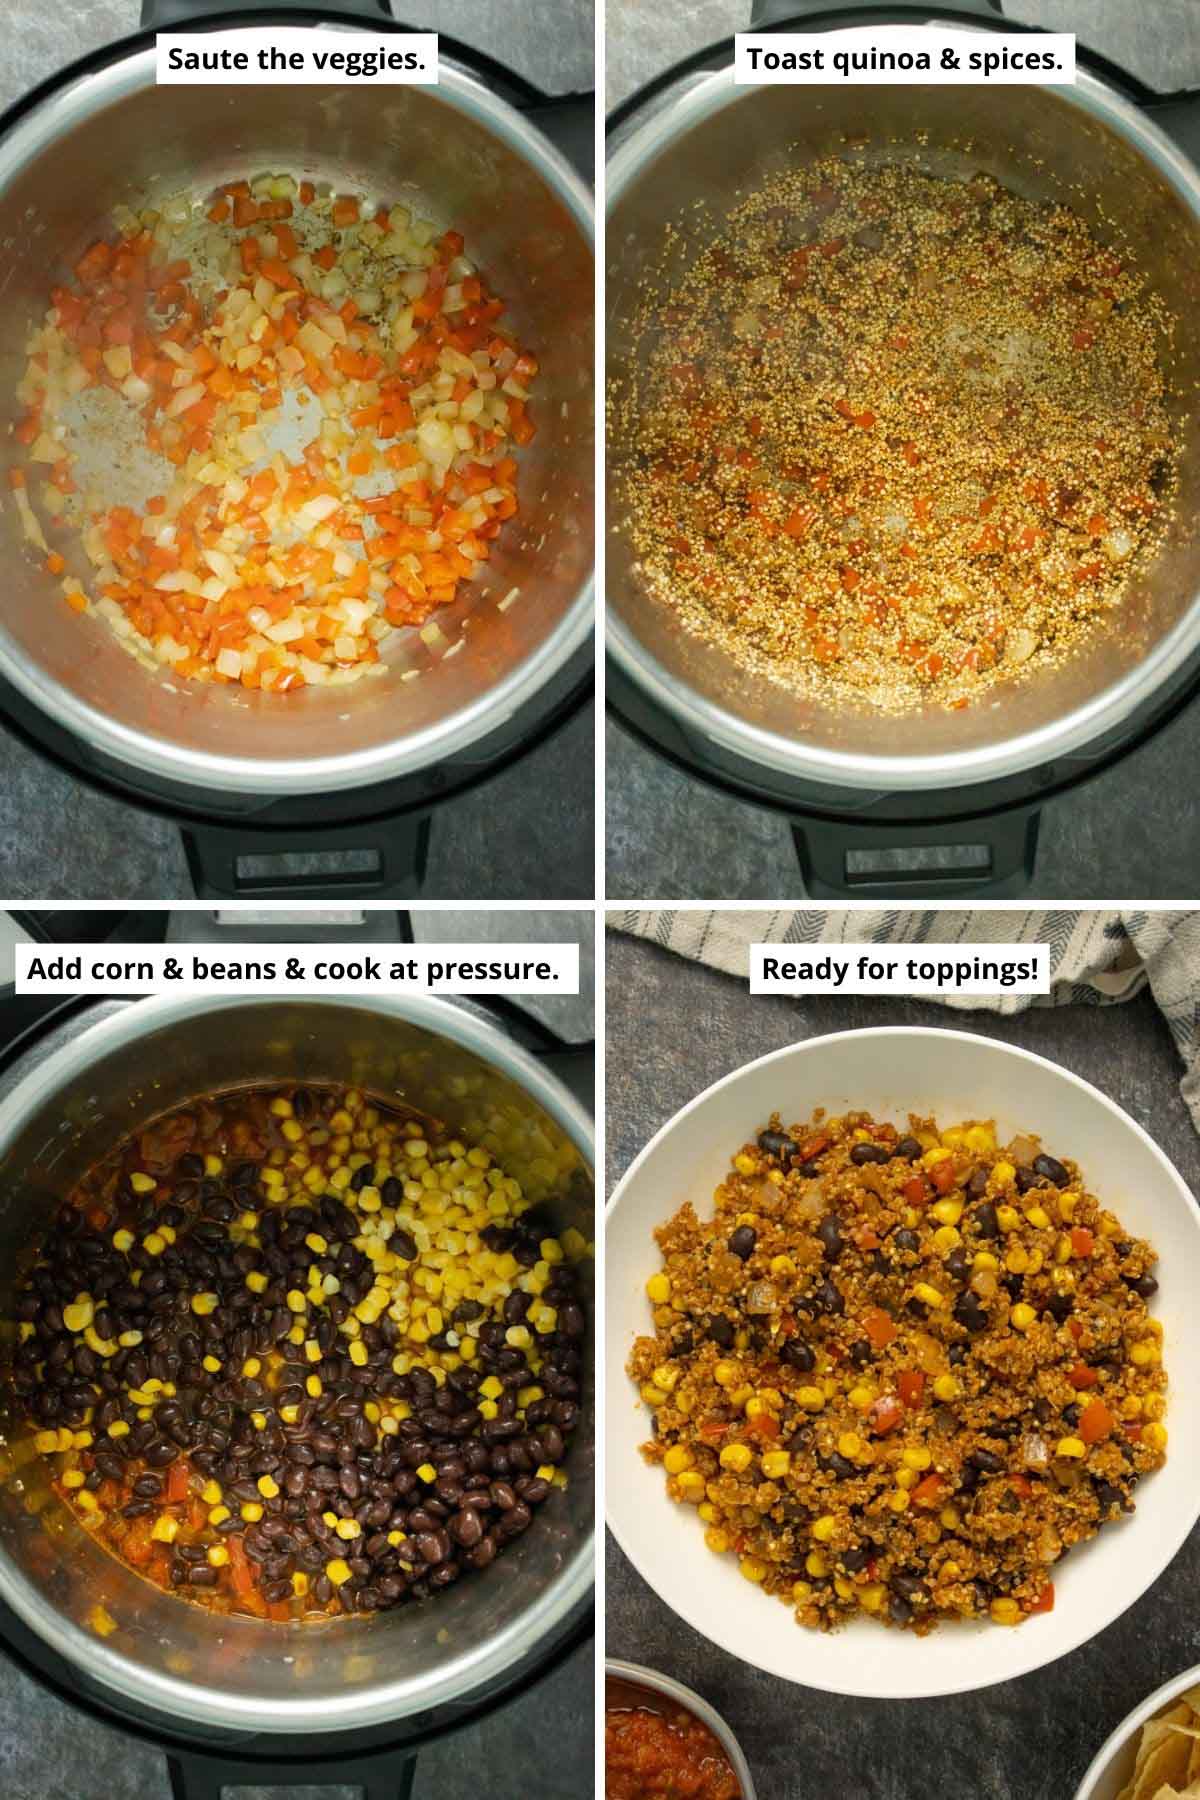 image collage showing the sautéed veggies in the pot, toasting the quinoa and spices, adding the corn and beans, and the cooked quinoa mixture in a bowl